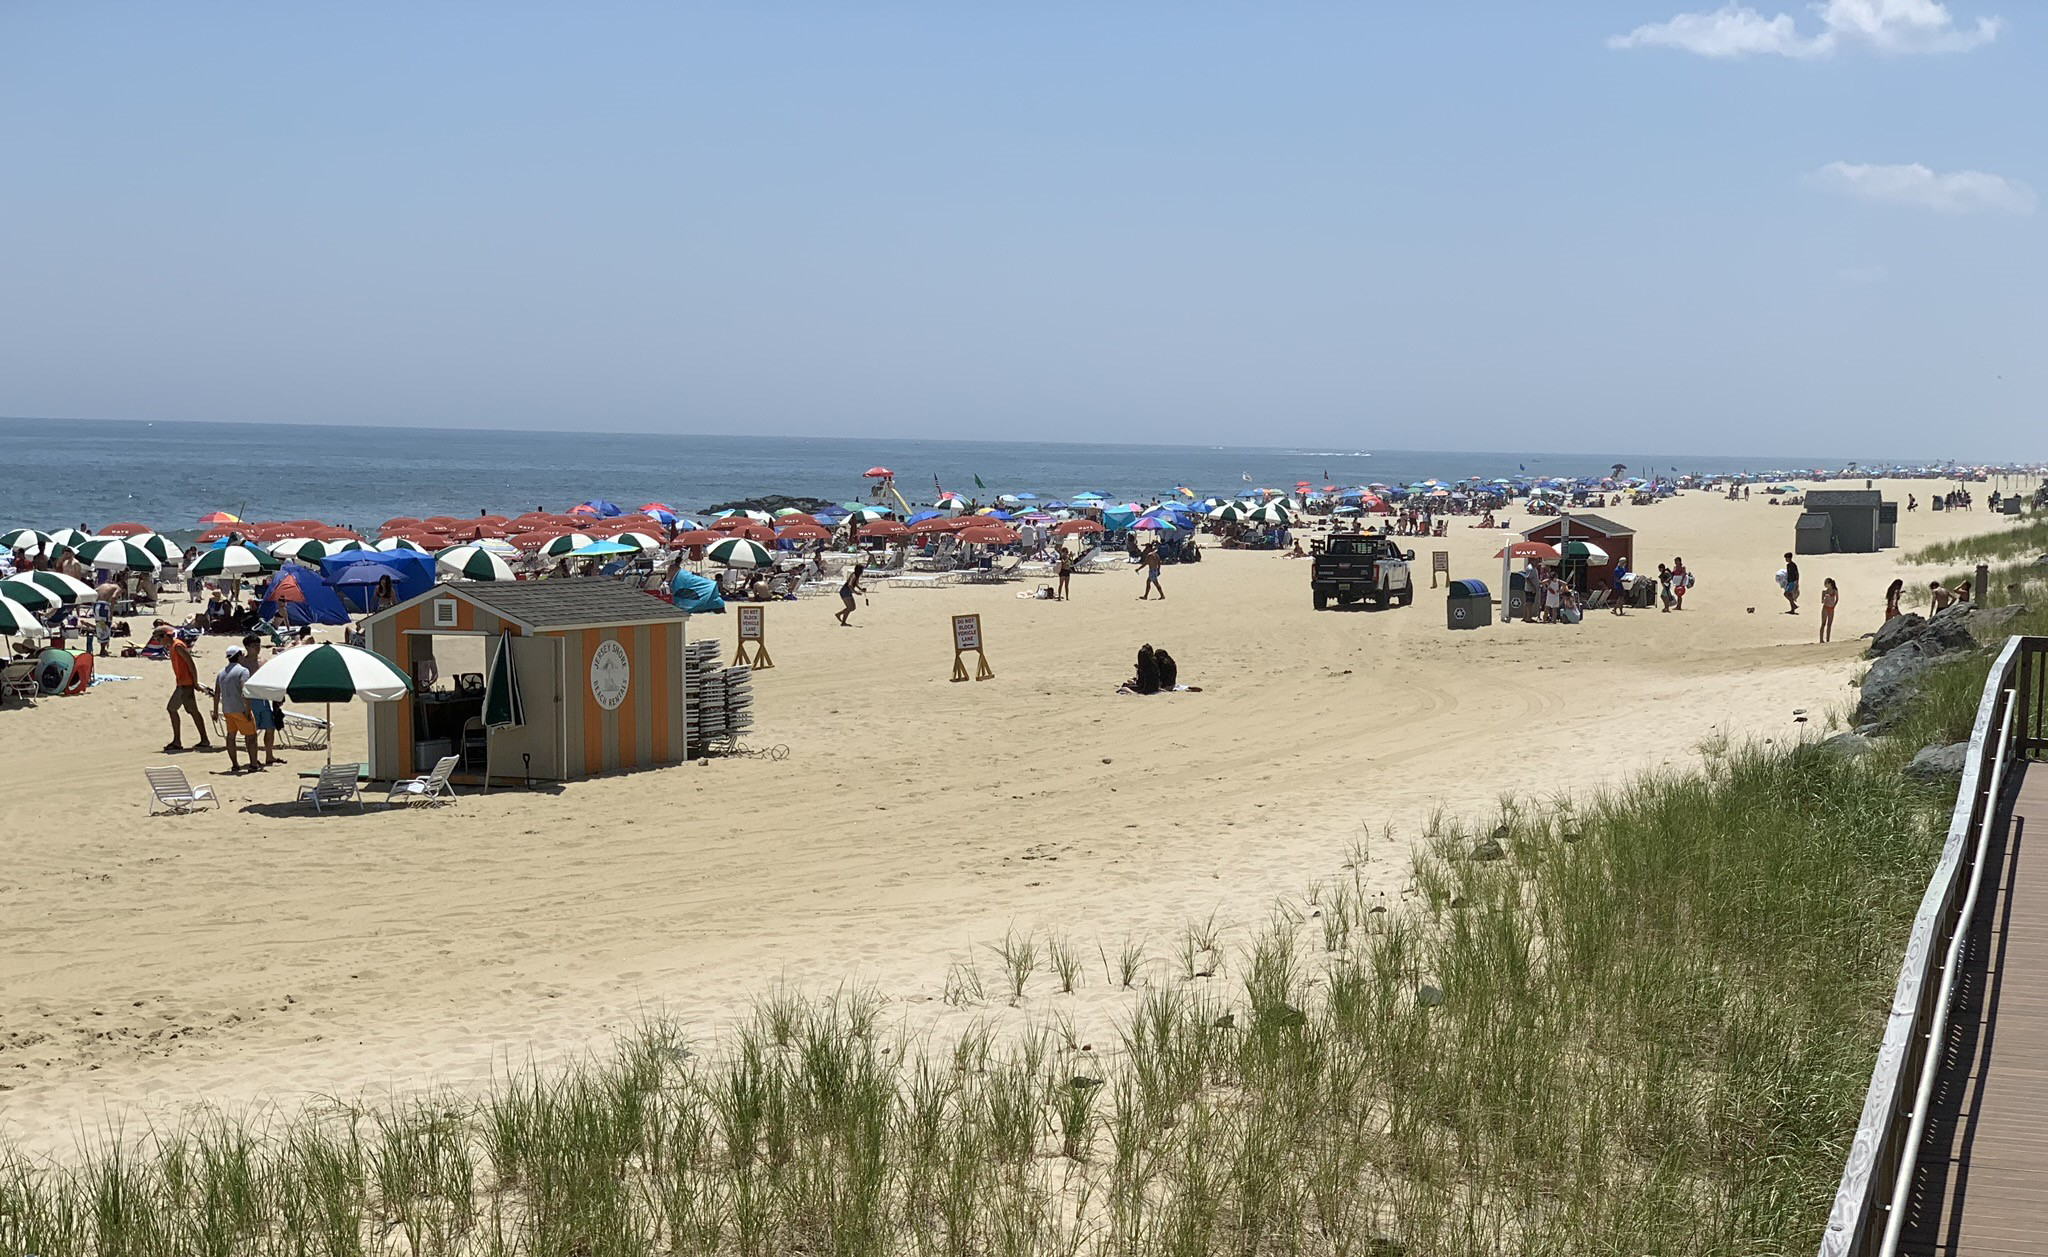 The top 5 things to do when visiting Long Branch, New Jersey